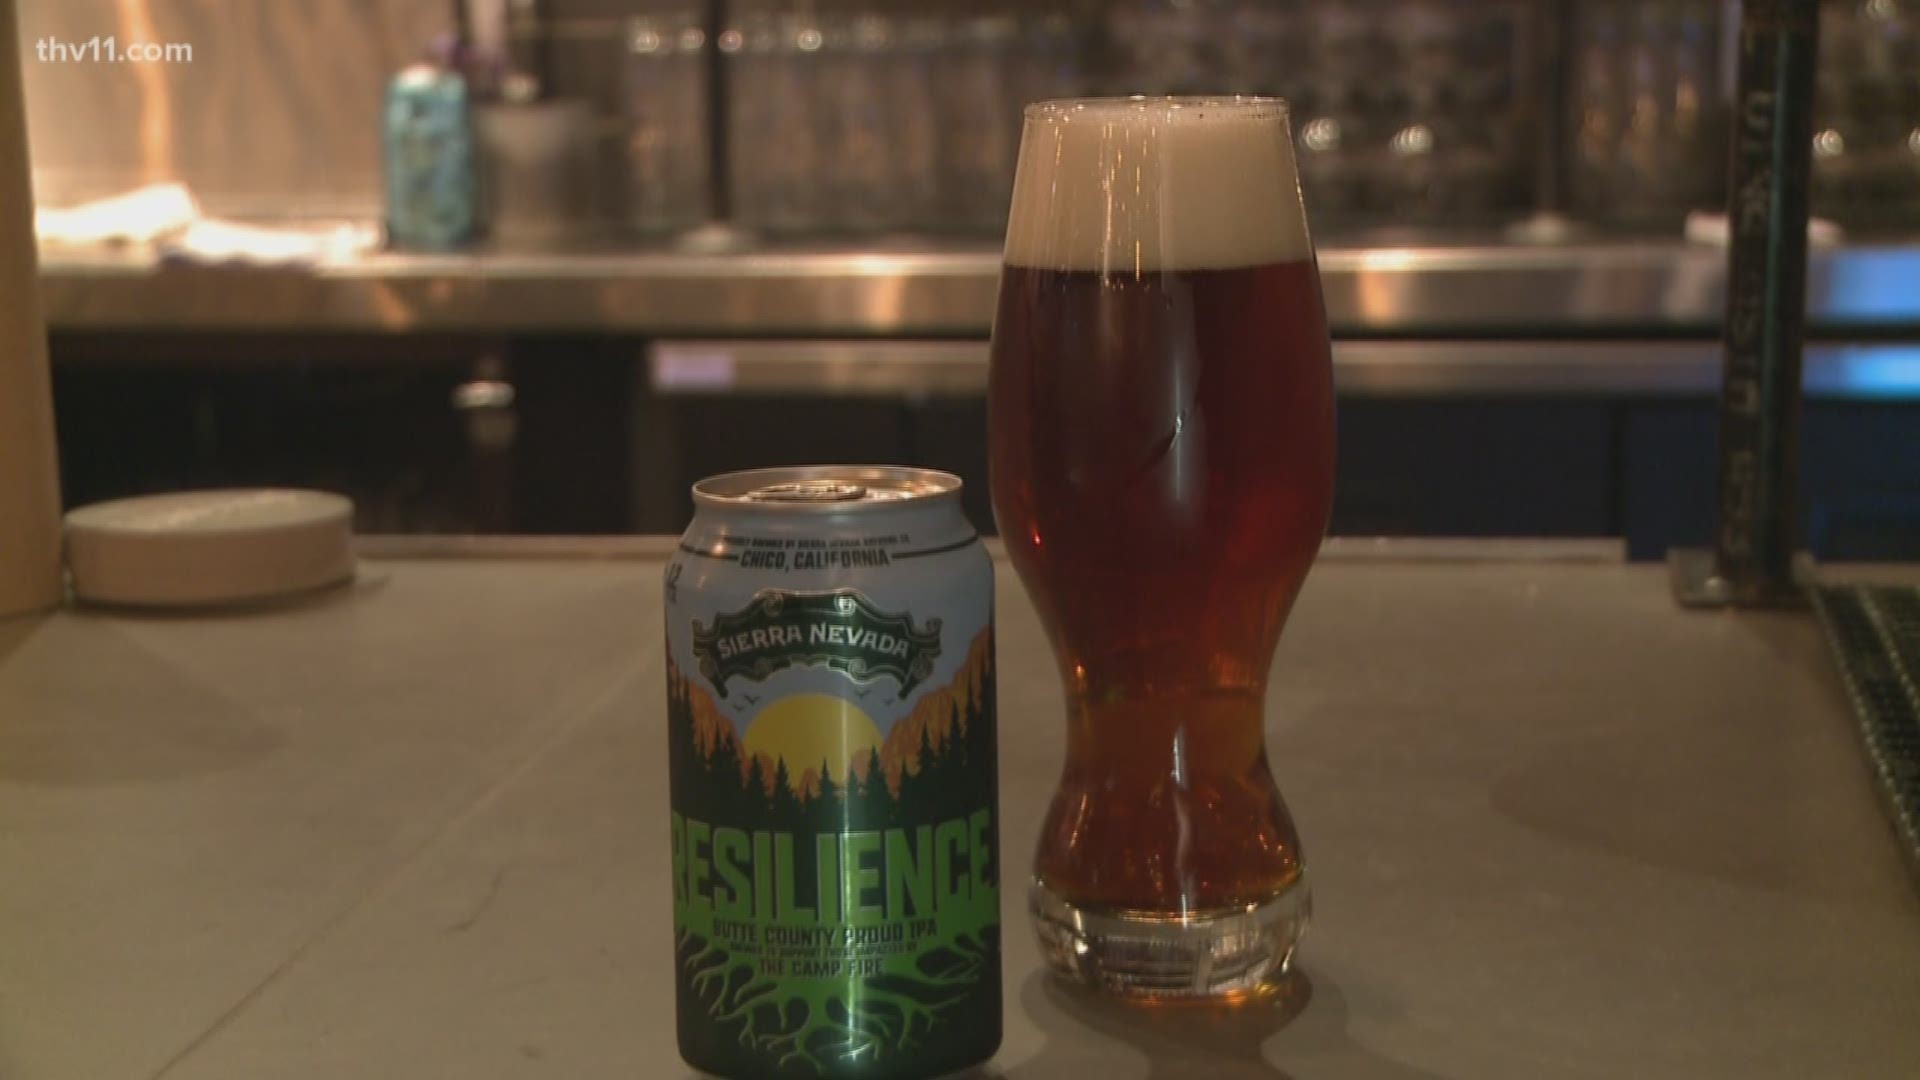 Lost 40, along with several other breweries including Diamond Bear, Rebel Kettle, Blue Canoe, Core and more, are selling "Resilience IPA." The money from sales goes to the Sierra Nevada Camp Fire Relief Fund.